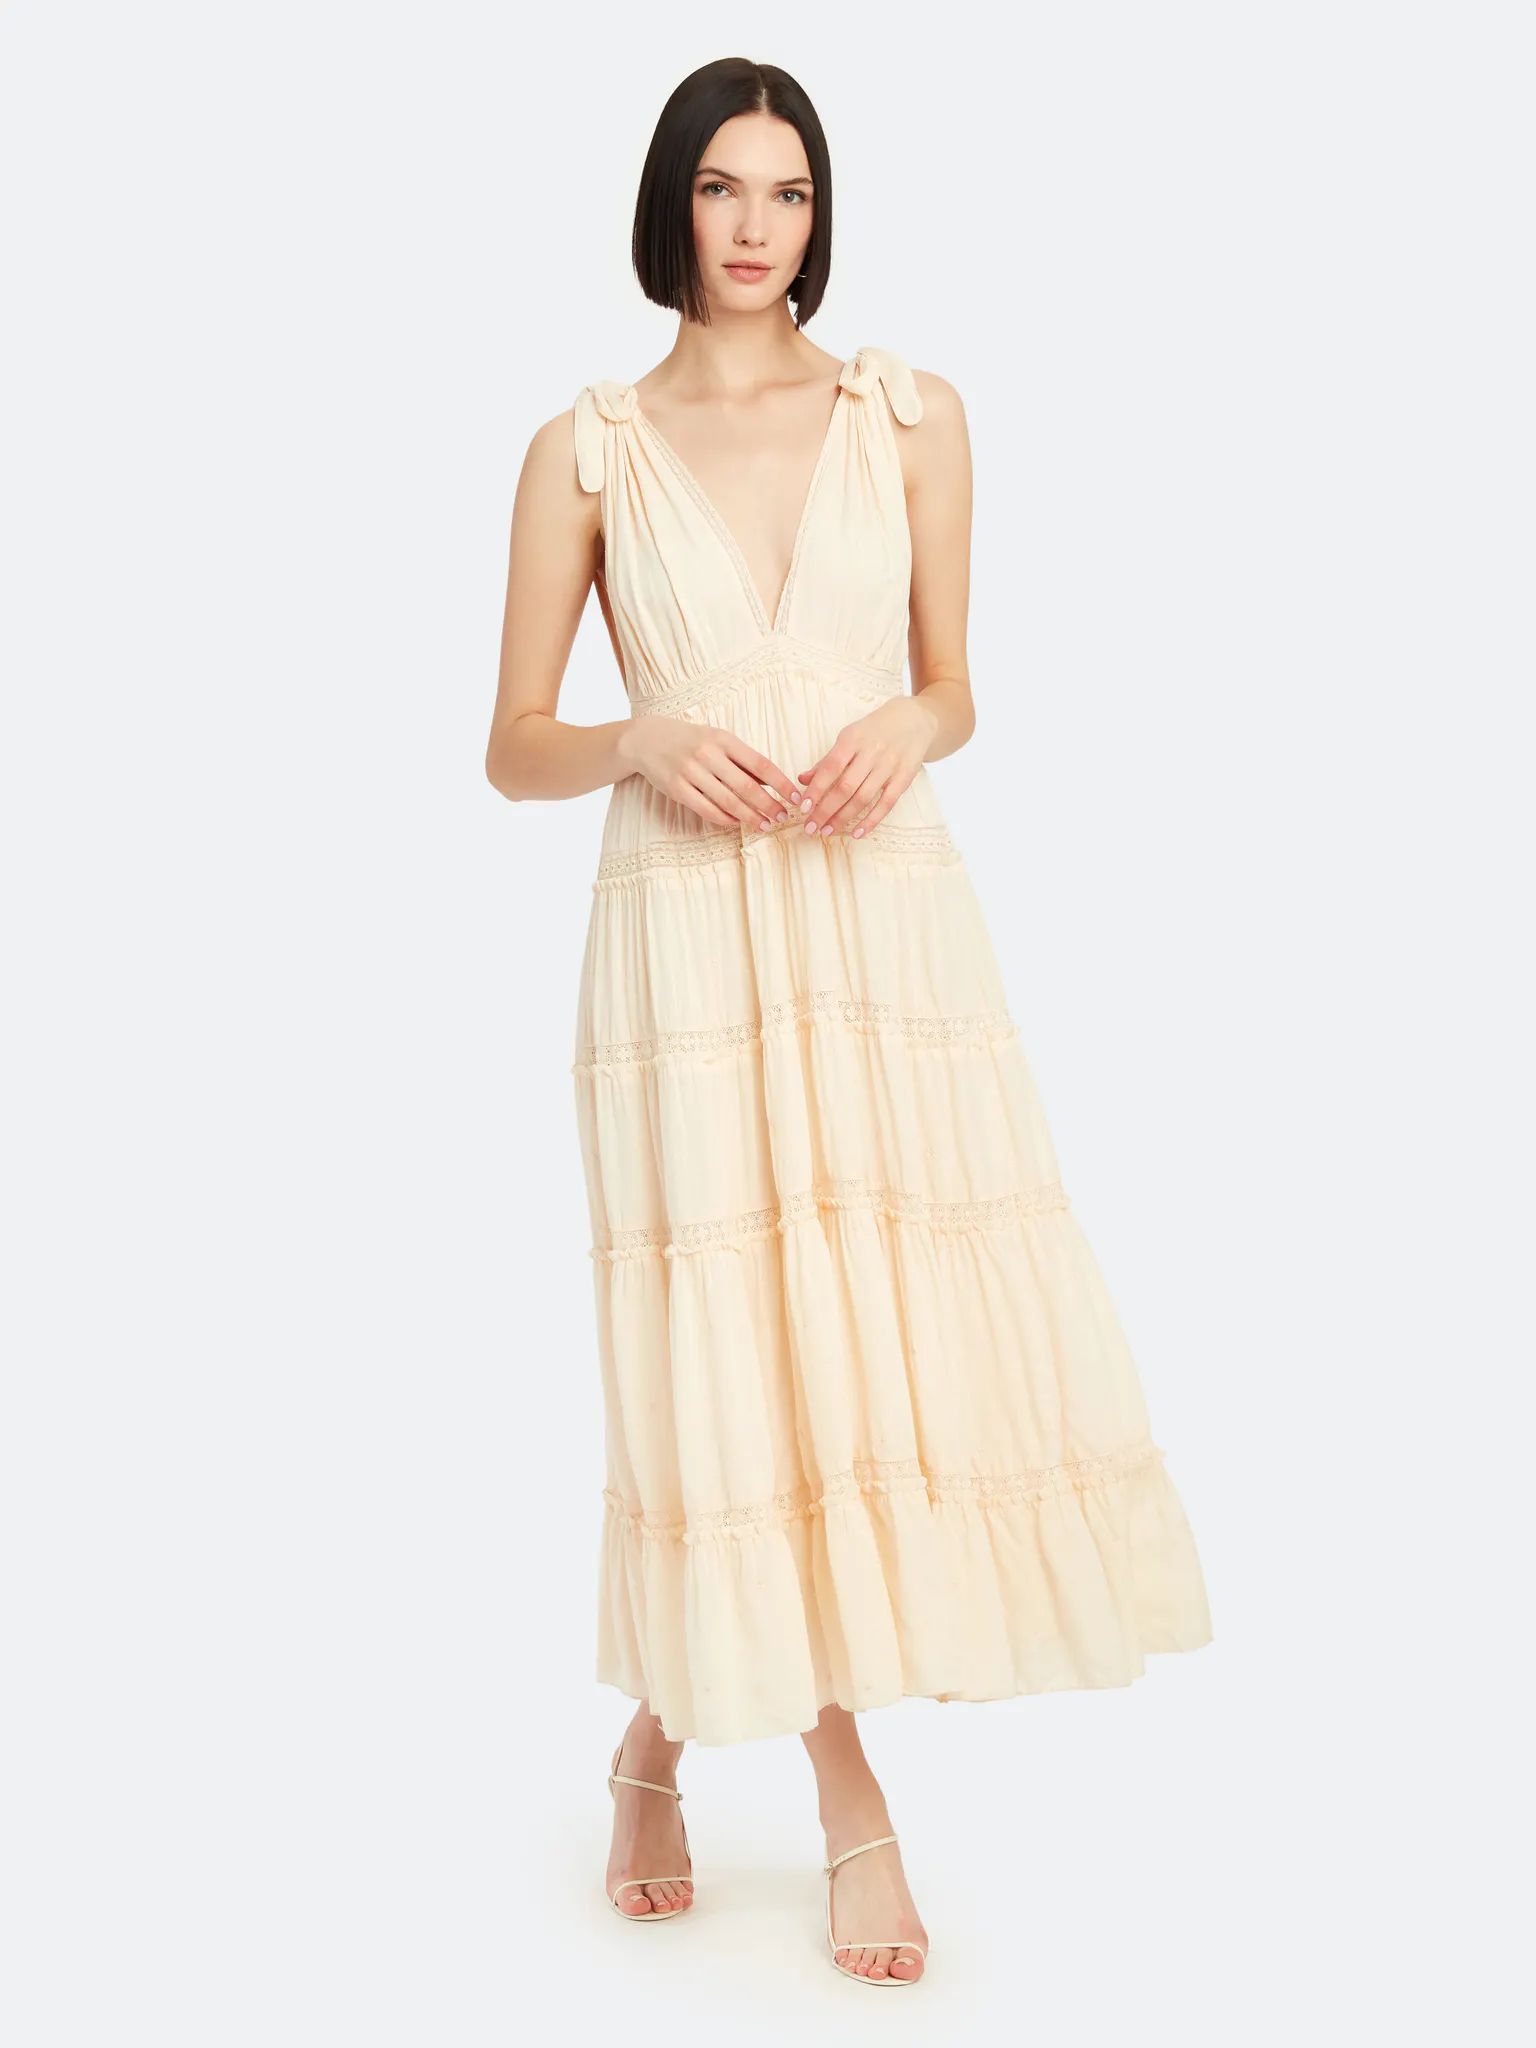 Lily of the Valley Maxi Dress | Verishop